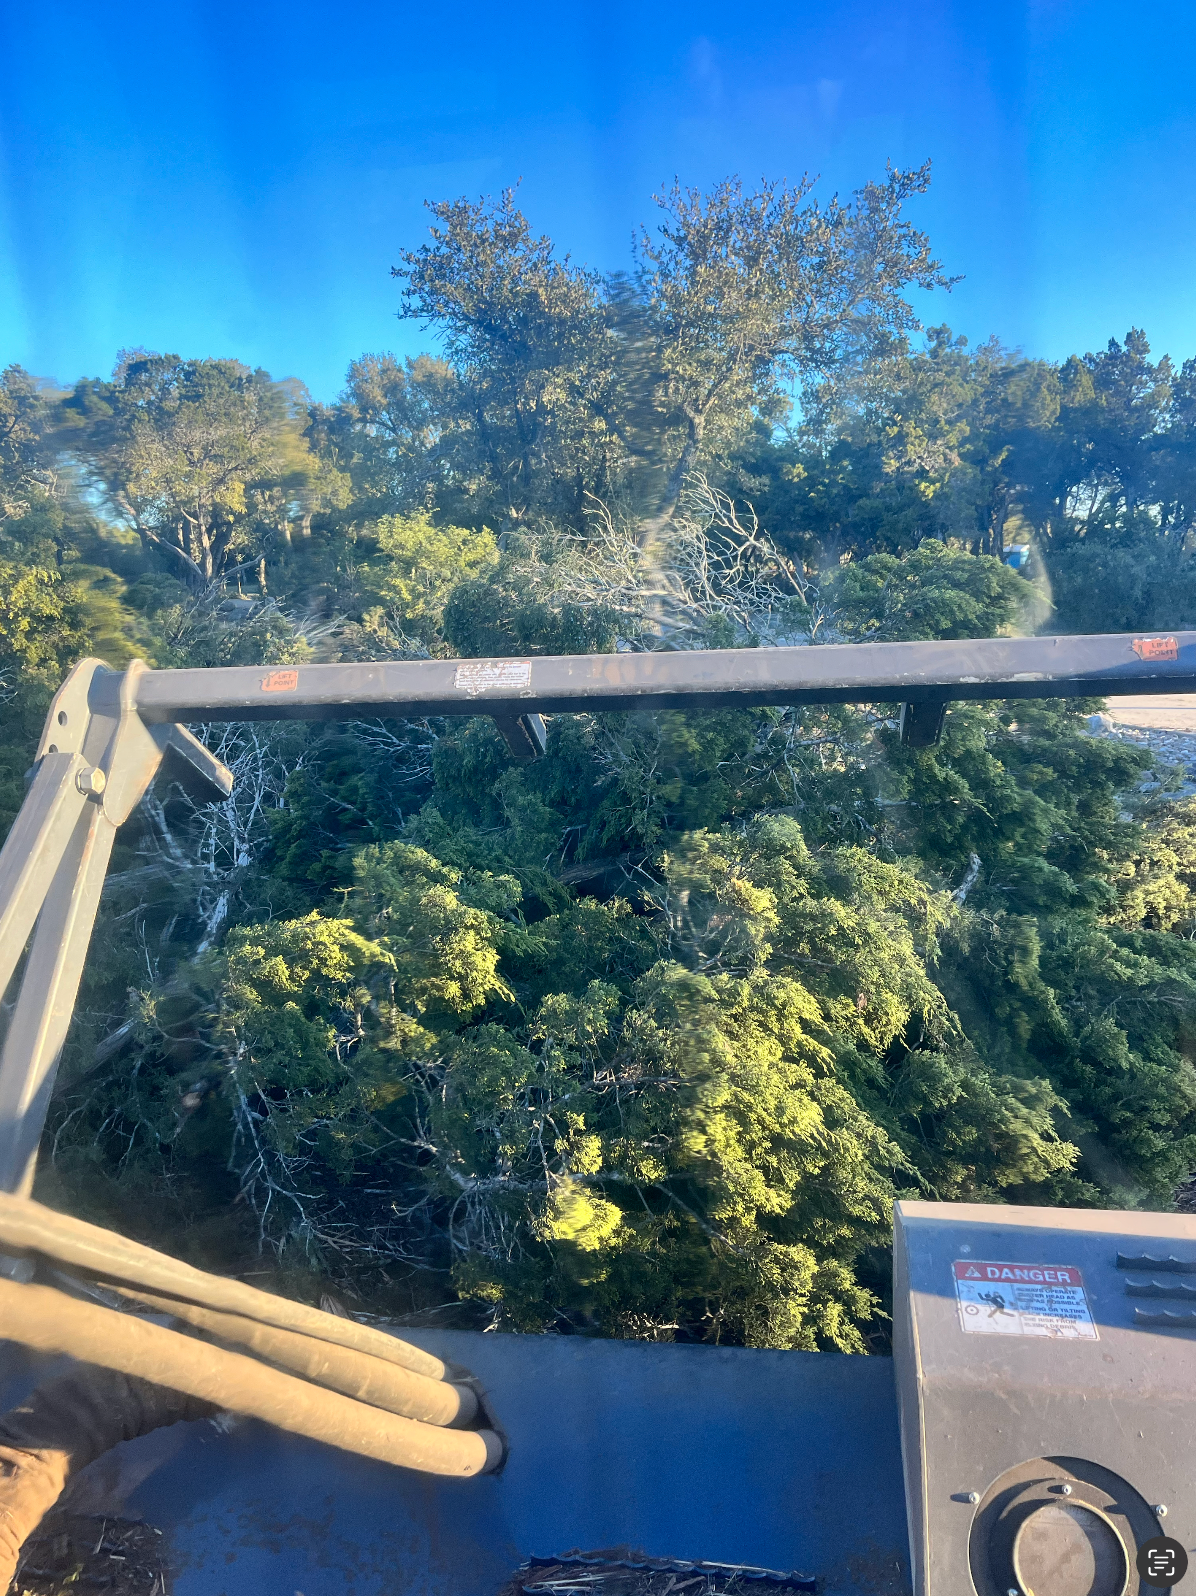 a view of a forest from the inside of a vehicle .